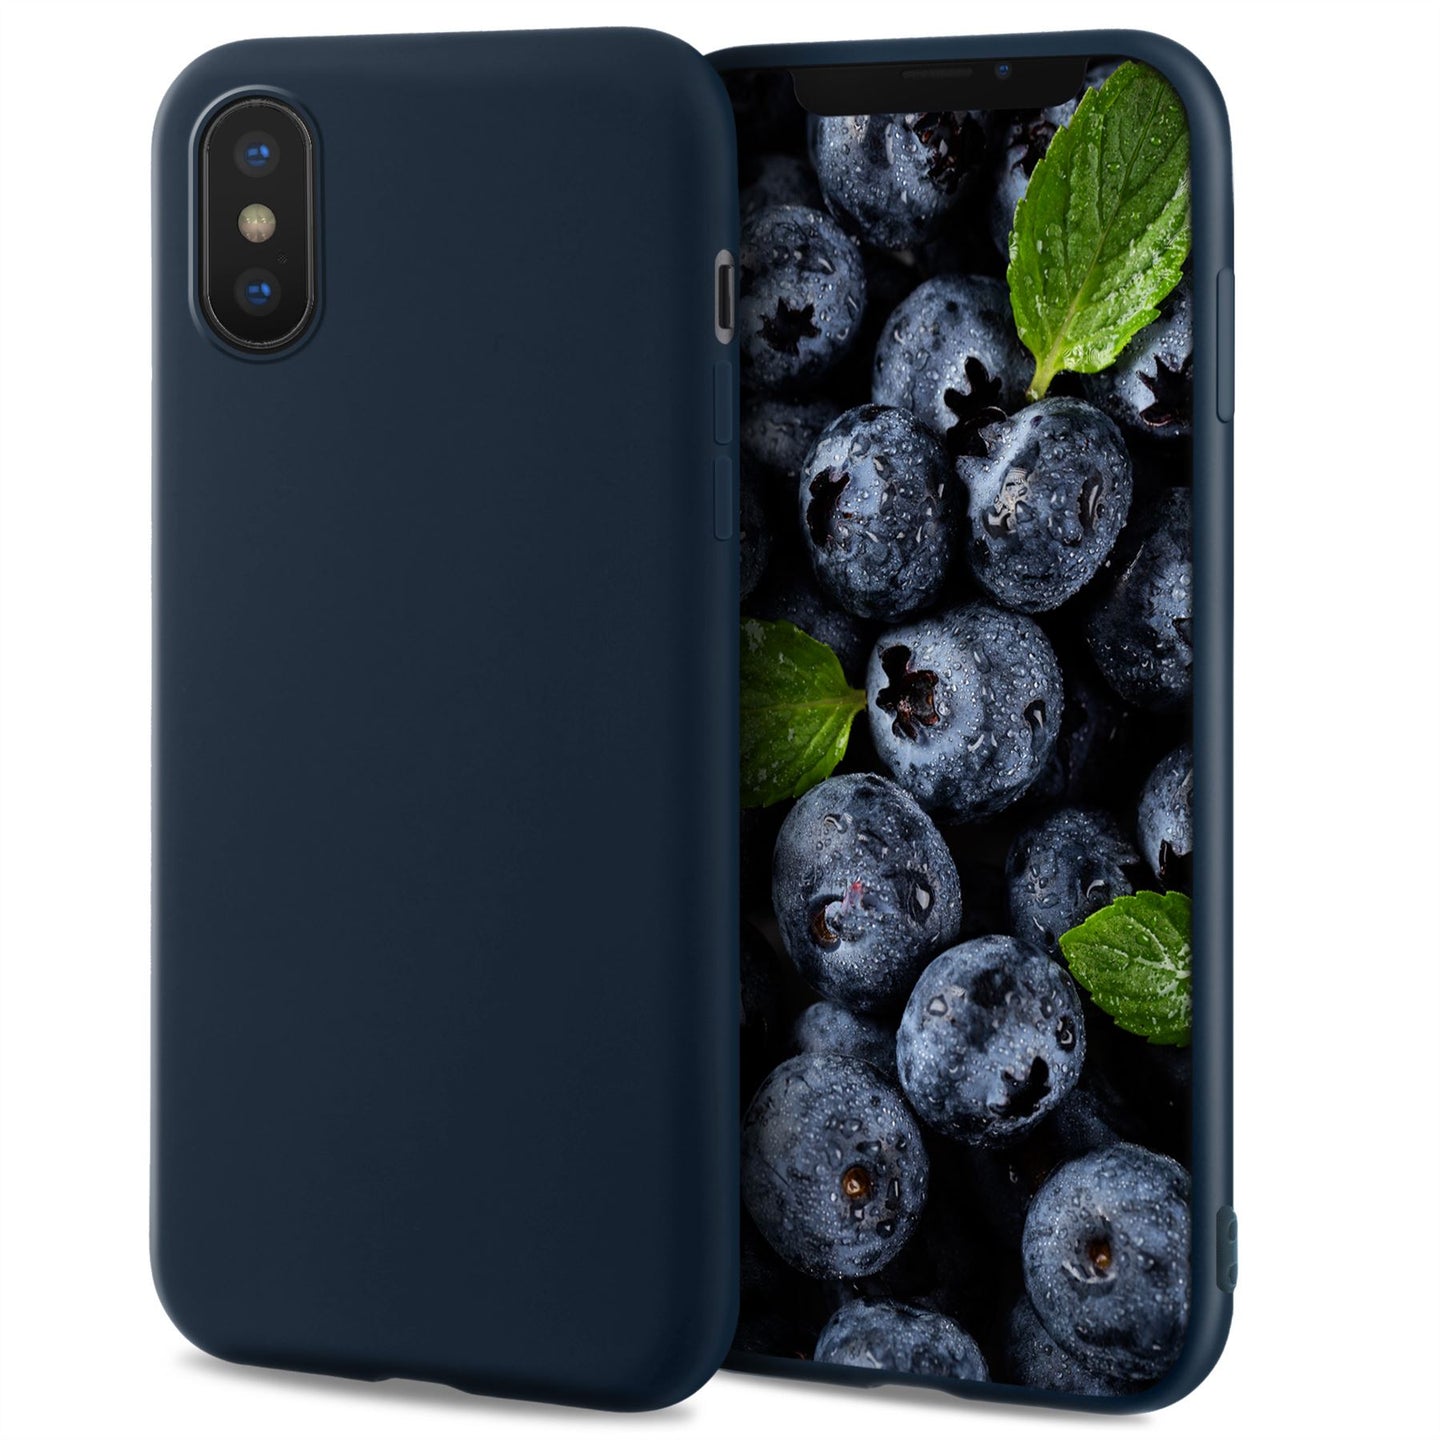 Moozy Lifestyle. Designed for iPhone X and iPhone XS Case, Midnight Blue - Liquid Silicone Cover with Matte Finish and Soft Microfiber Lining